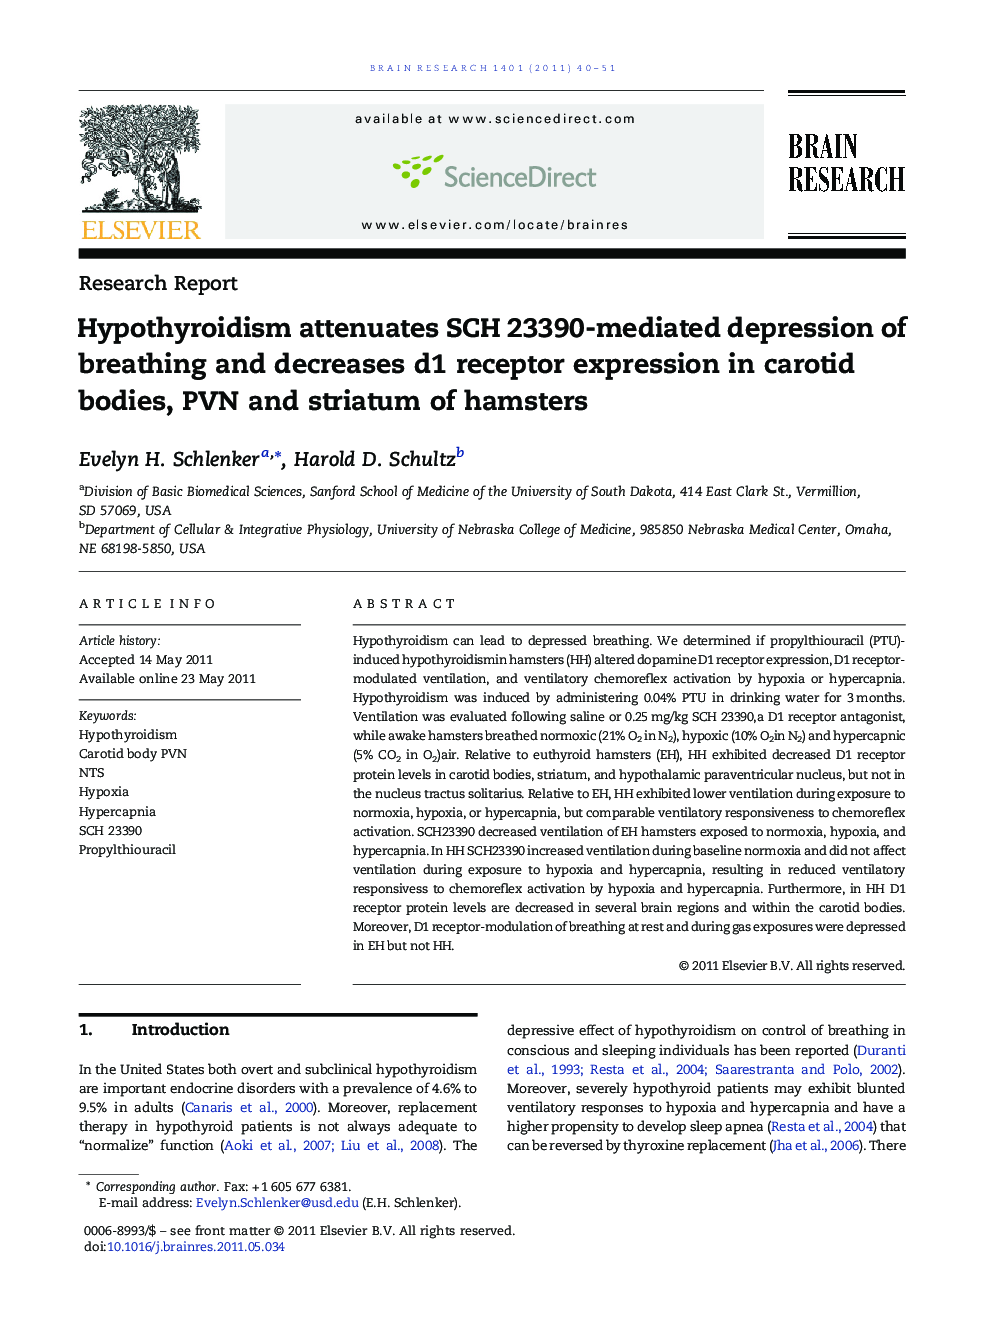 Hypothyroidism attenuates SCH 23390-mediated depression of breathing and decreases d1 receptor expression in carotid bodies, PVN and striatum of hamsters